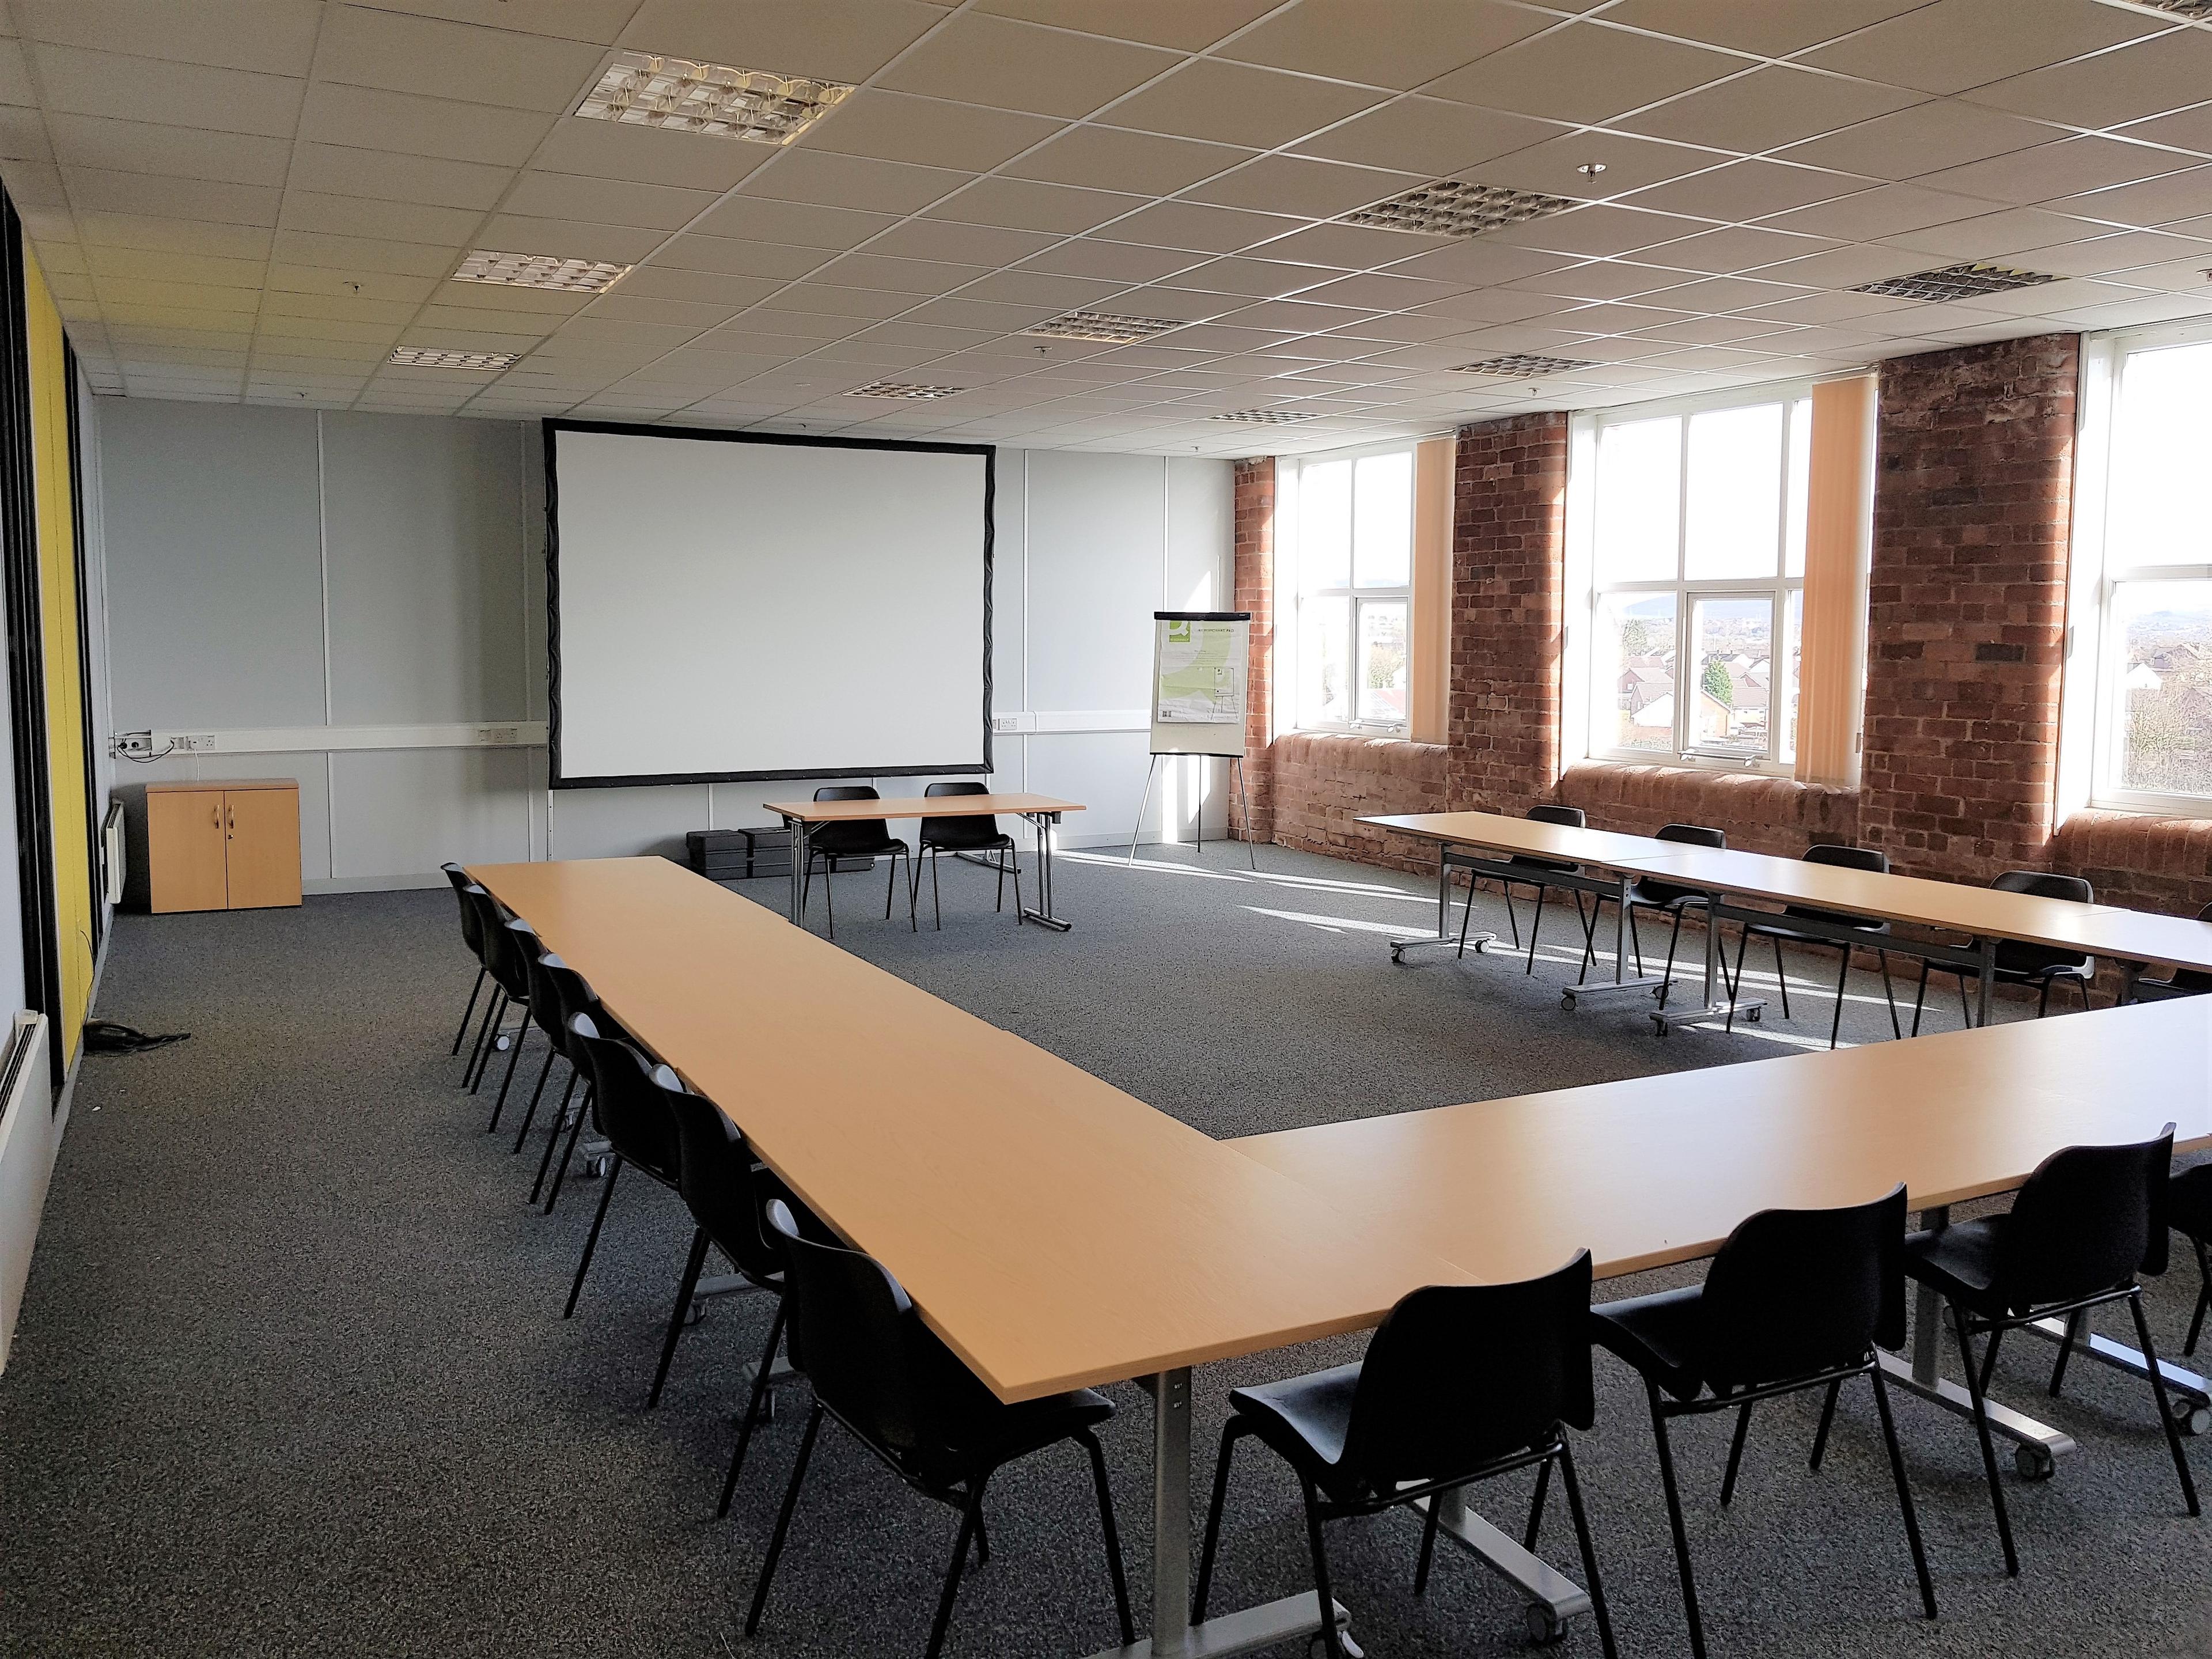 Earl Business Centre, Vivid - Conference Room 2 photo #3